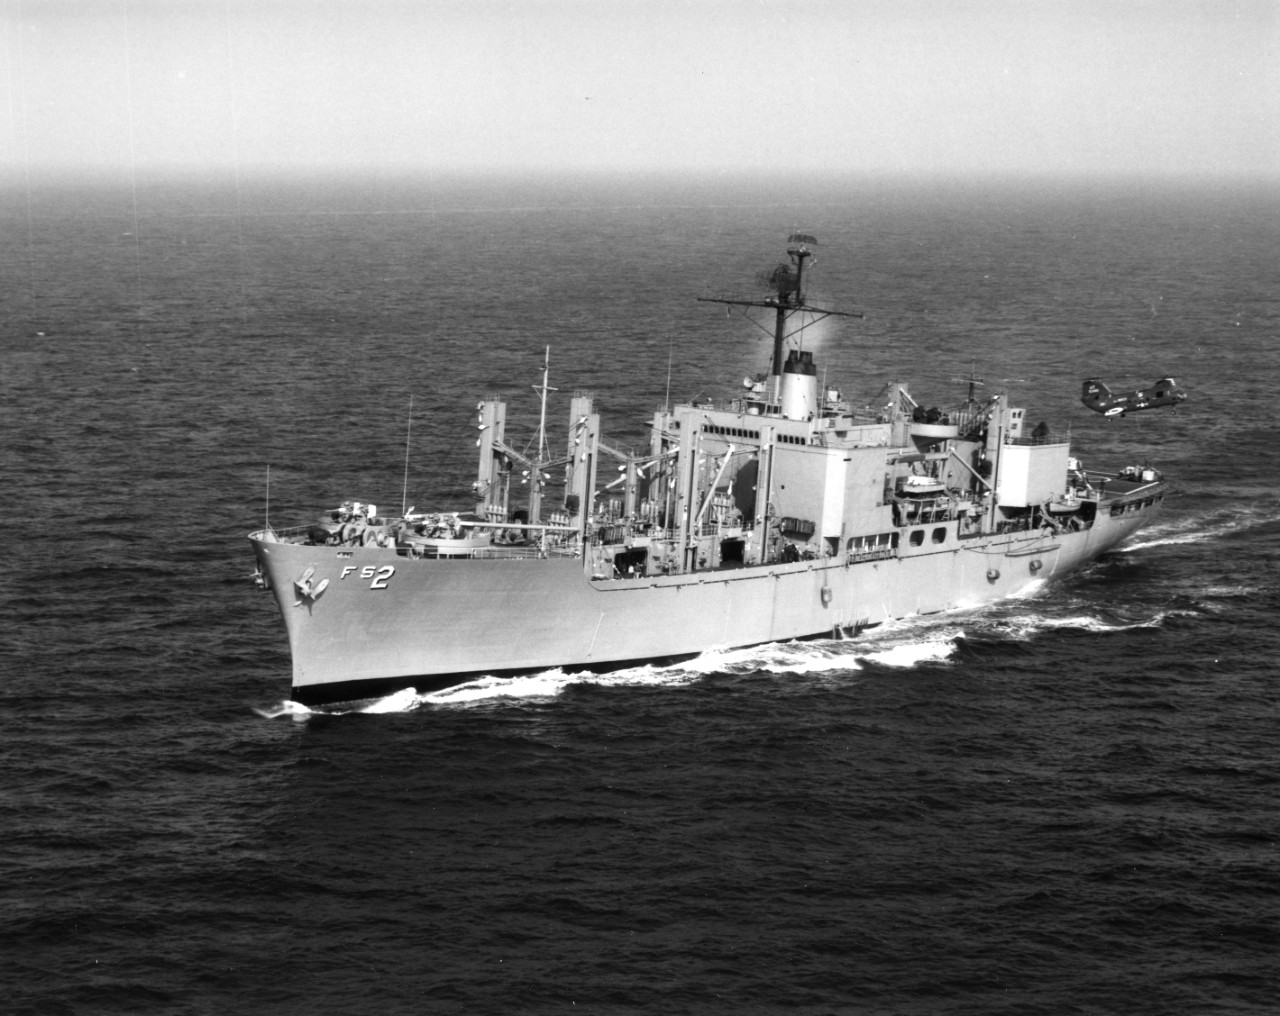 Aerial view of fast combat stores ship USS Sylvania (AFS-2) underway in the Mediterranean, April 1967. Vertical replenishment operations are being conducted by an H-46 Sea Knight helicopter.